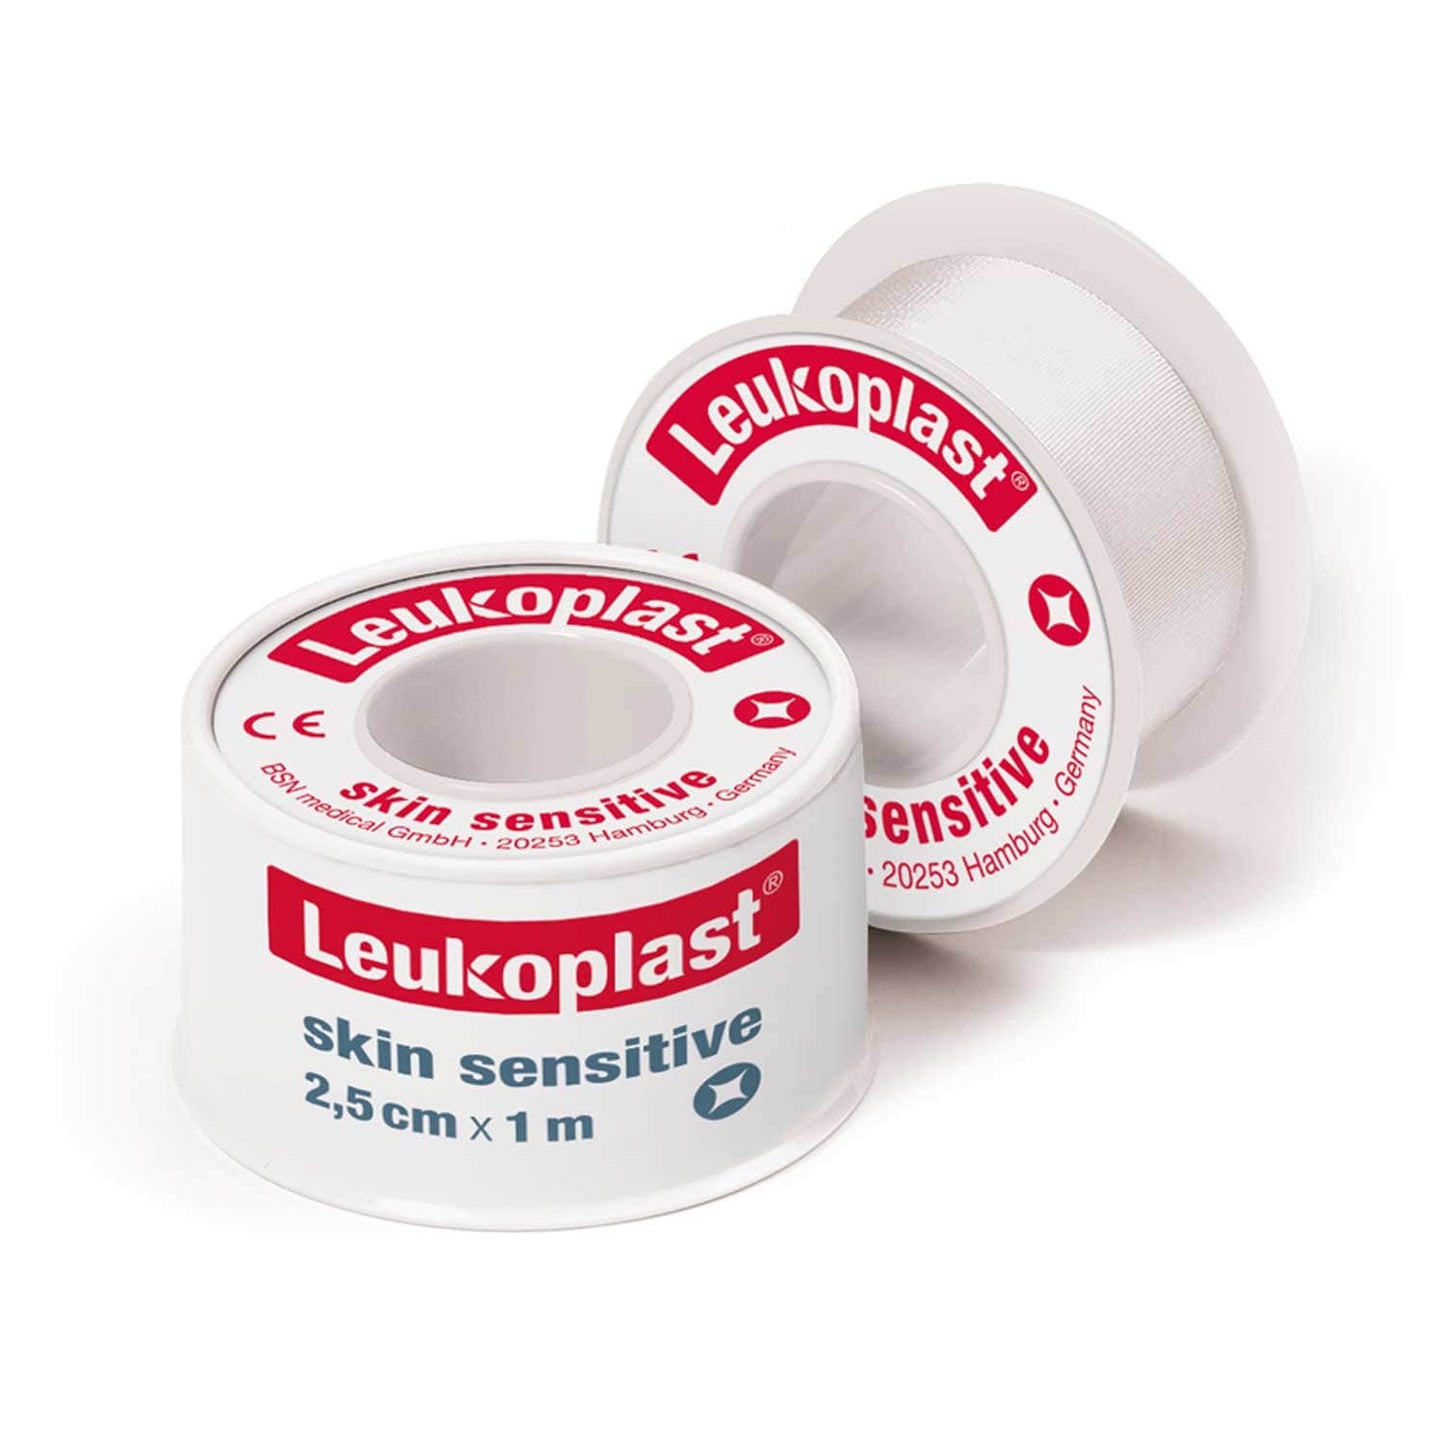 Leukoplast® Skin Sensitive   Available With And Without Protective Ring